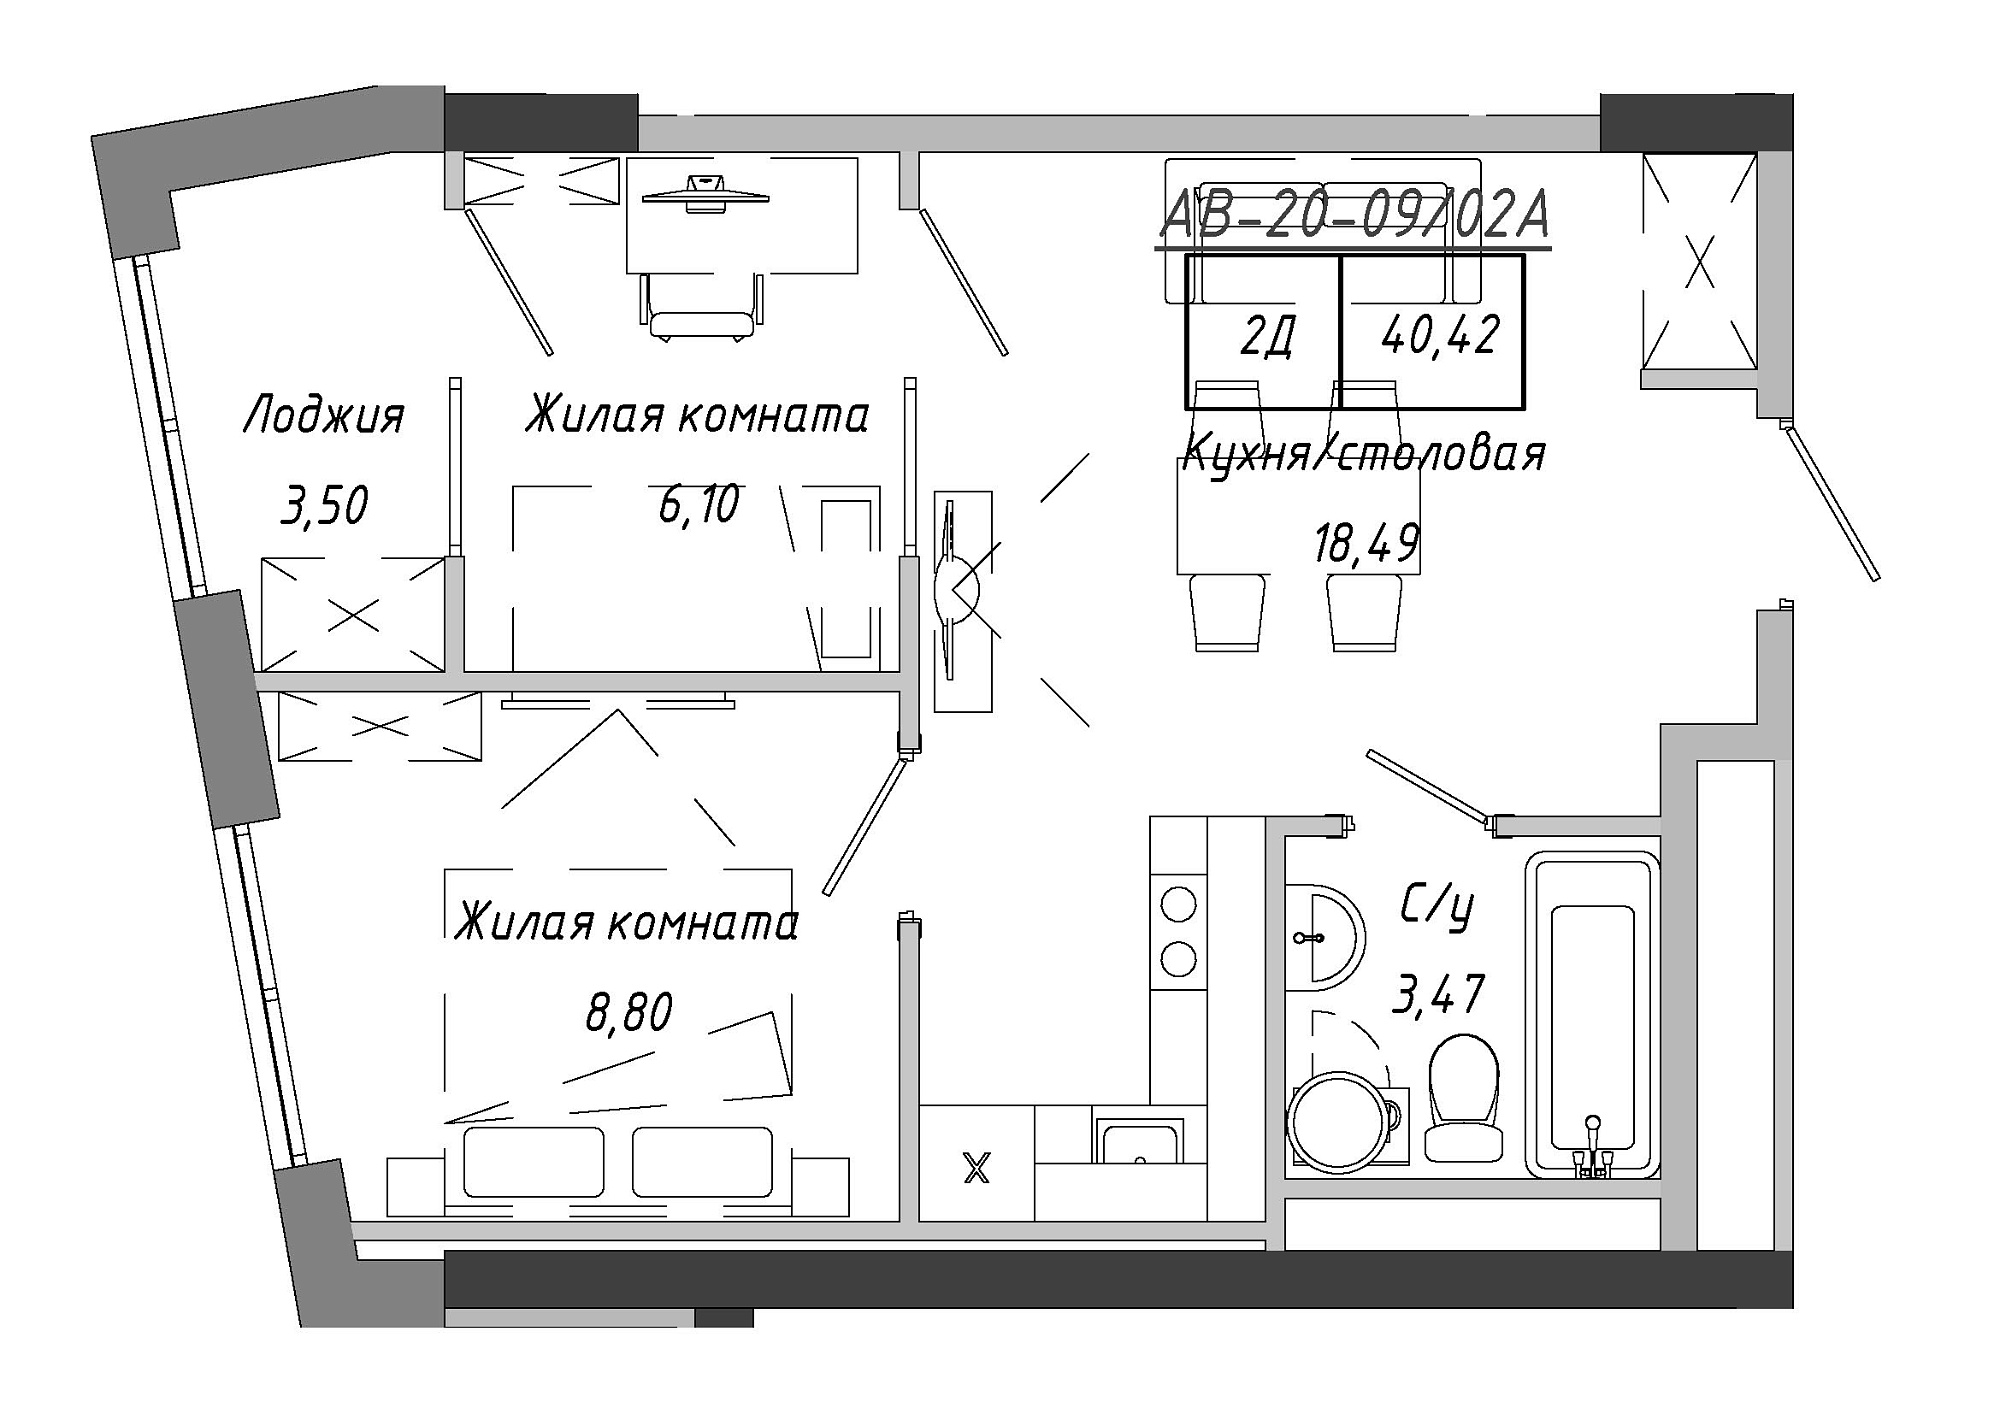 Planning 2-rm flats area 41.9m2, AB-20-09/0002а.